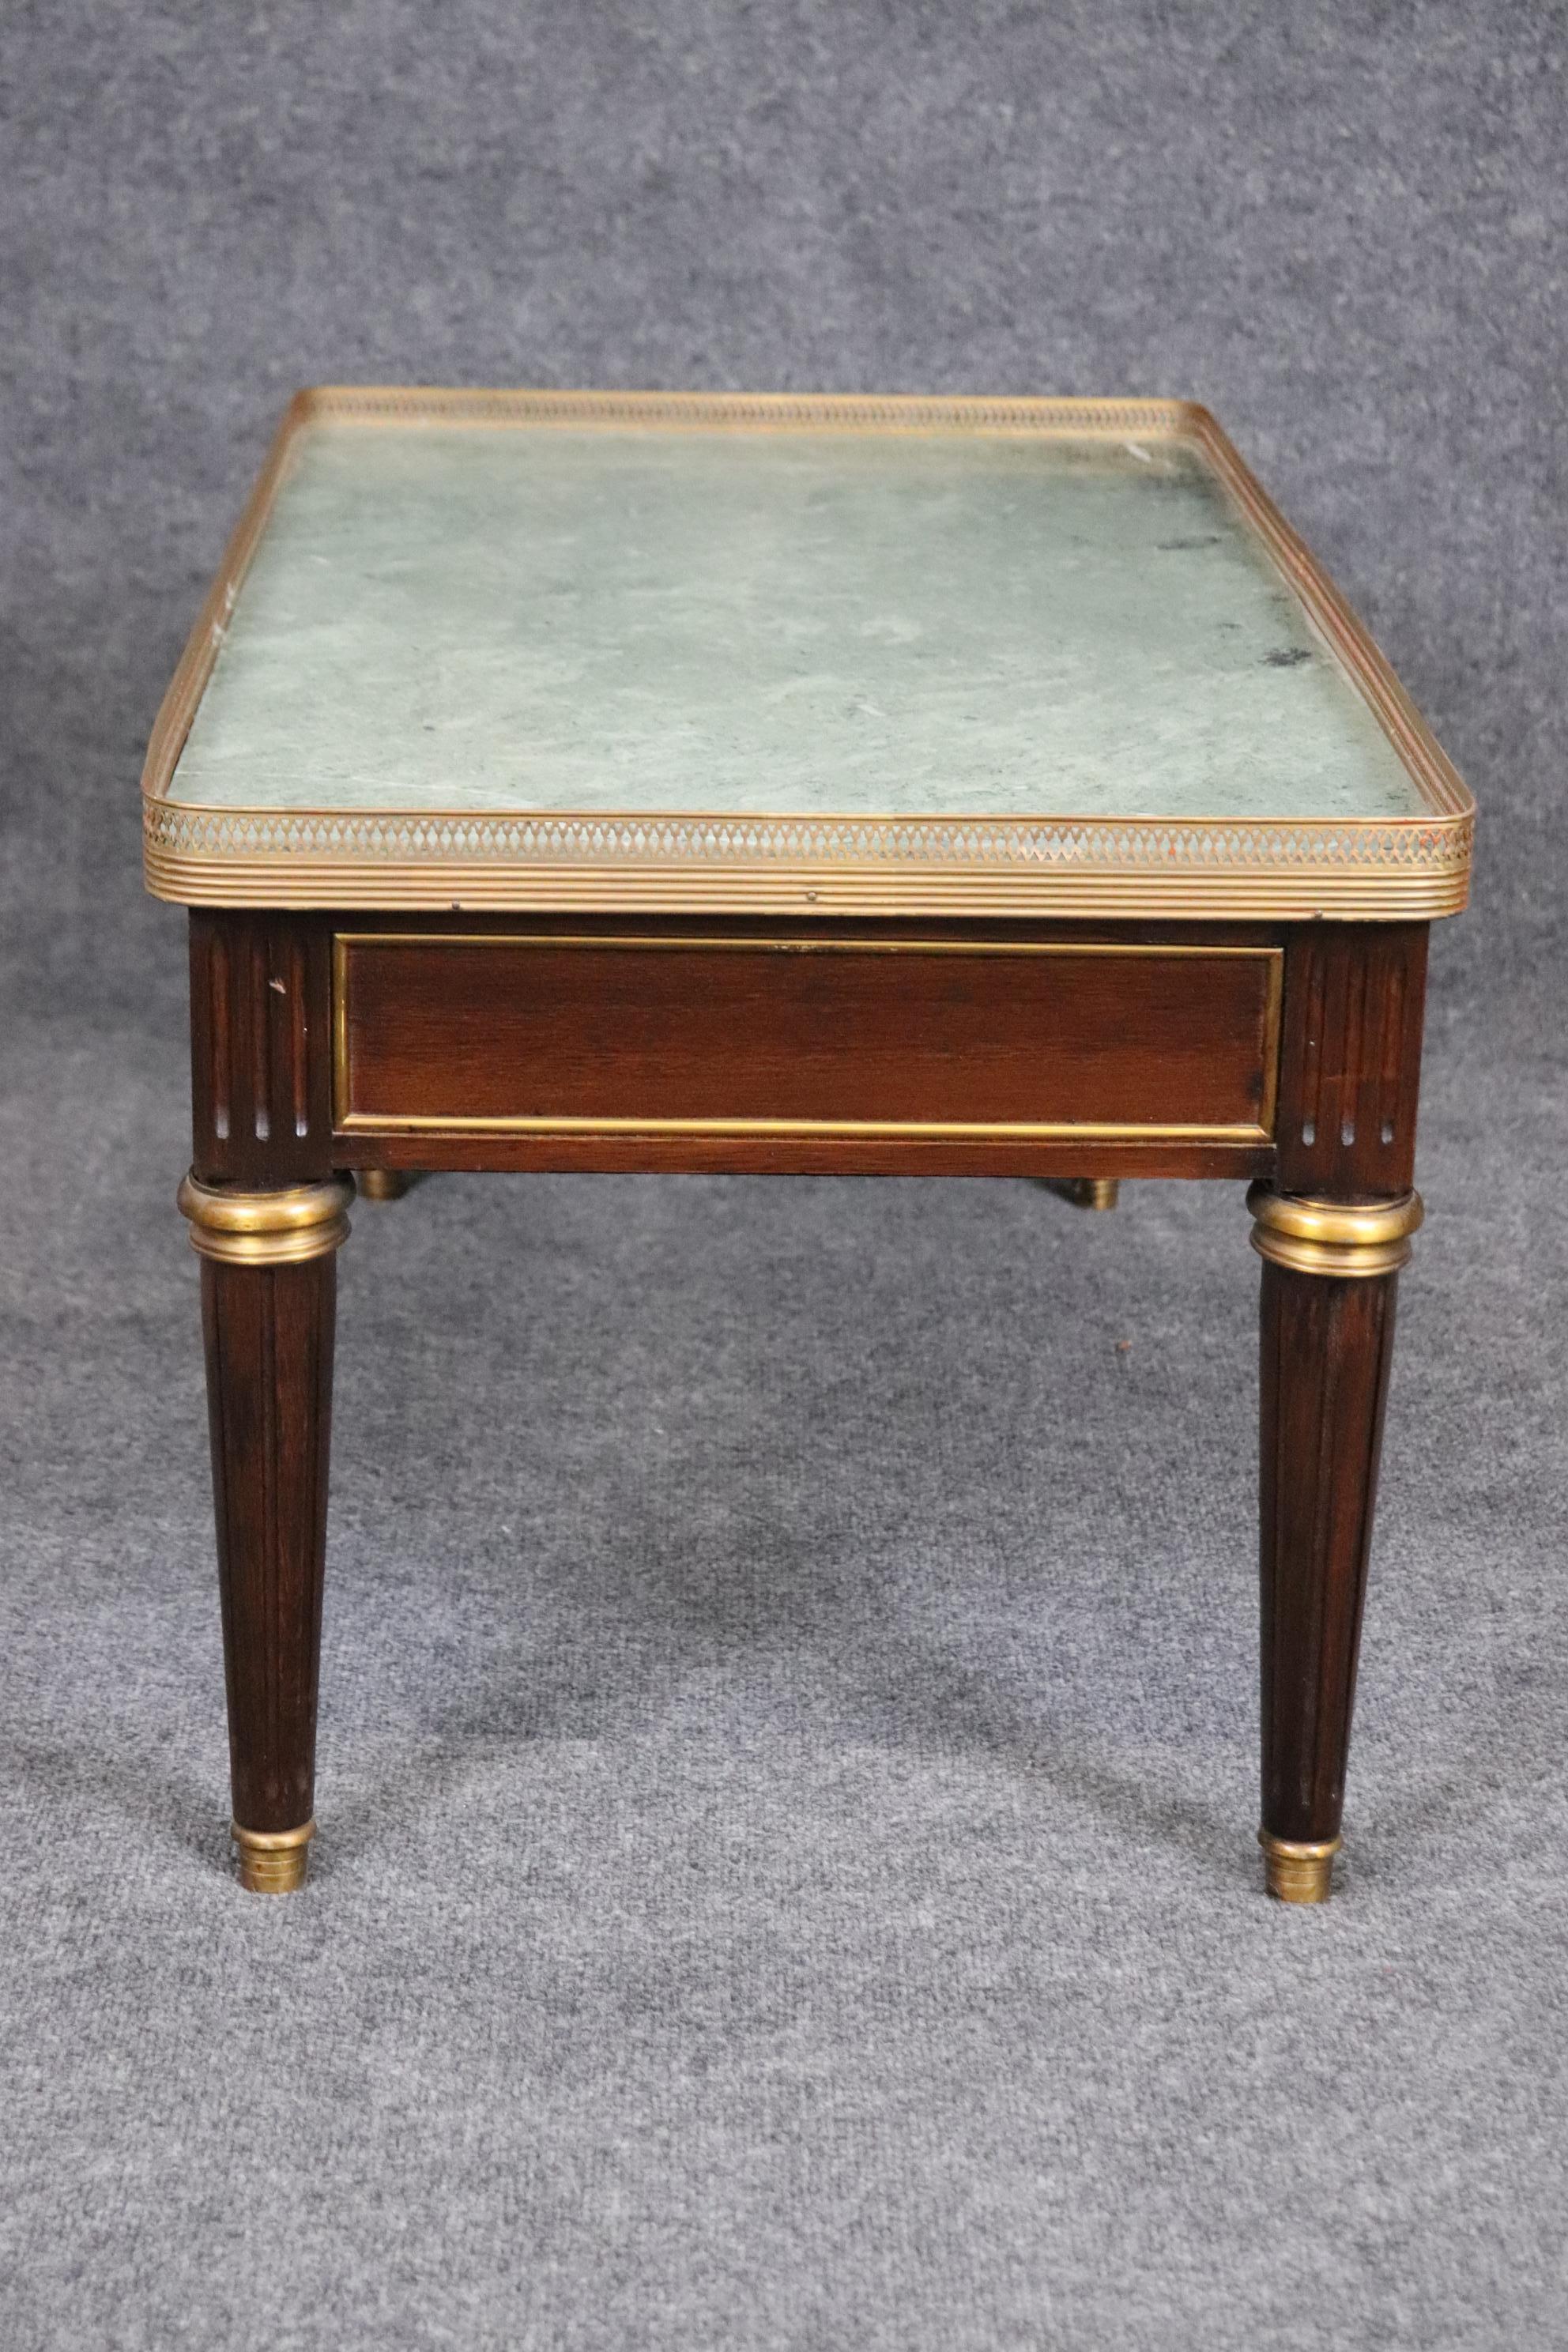 Louis XVI Style Marble Top Coffee Table Attributed to Maison Jansen In Good Condition For Sale In Swedesboro, NJ